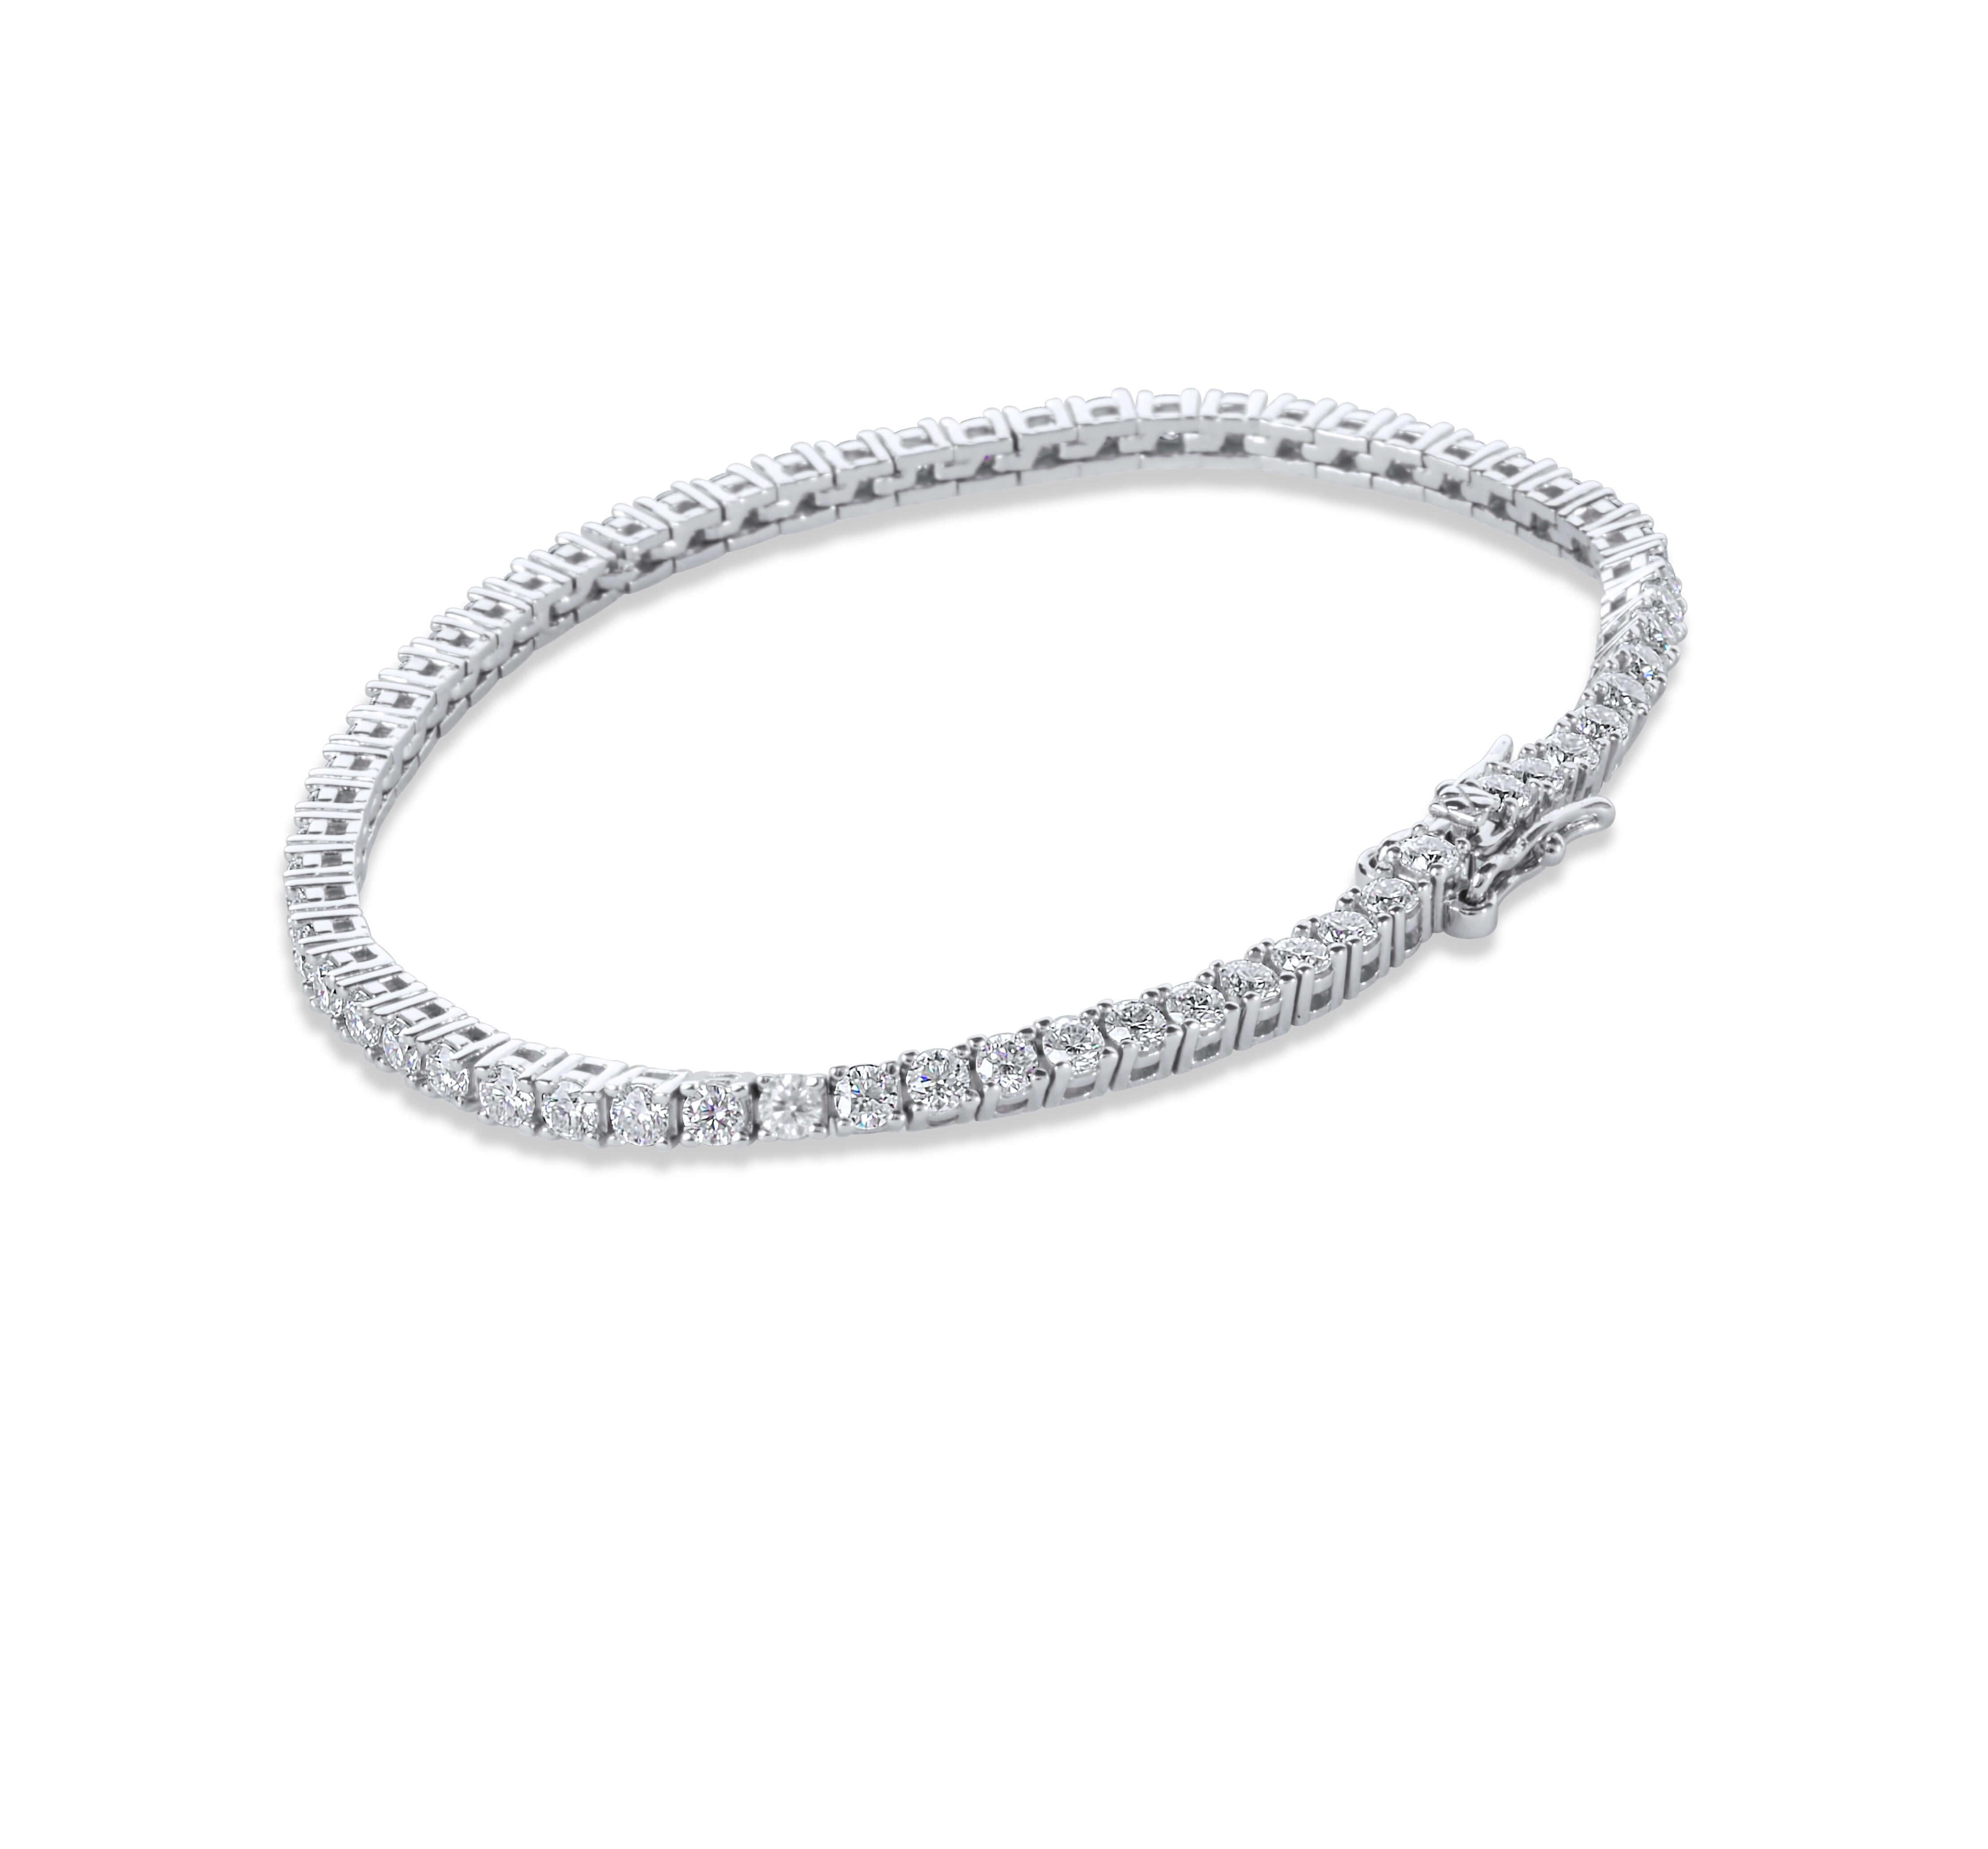 NWJ Fine Jewellery - Stack up the silver. 1. Silver belcher chain with free  bracelet set Valued at R3198, now less 50% R1599. 2. Silver belcher bracelet  Valued at R4998, now less